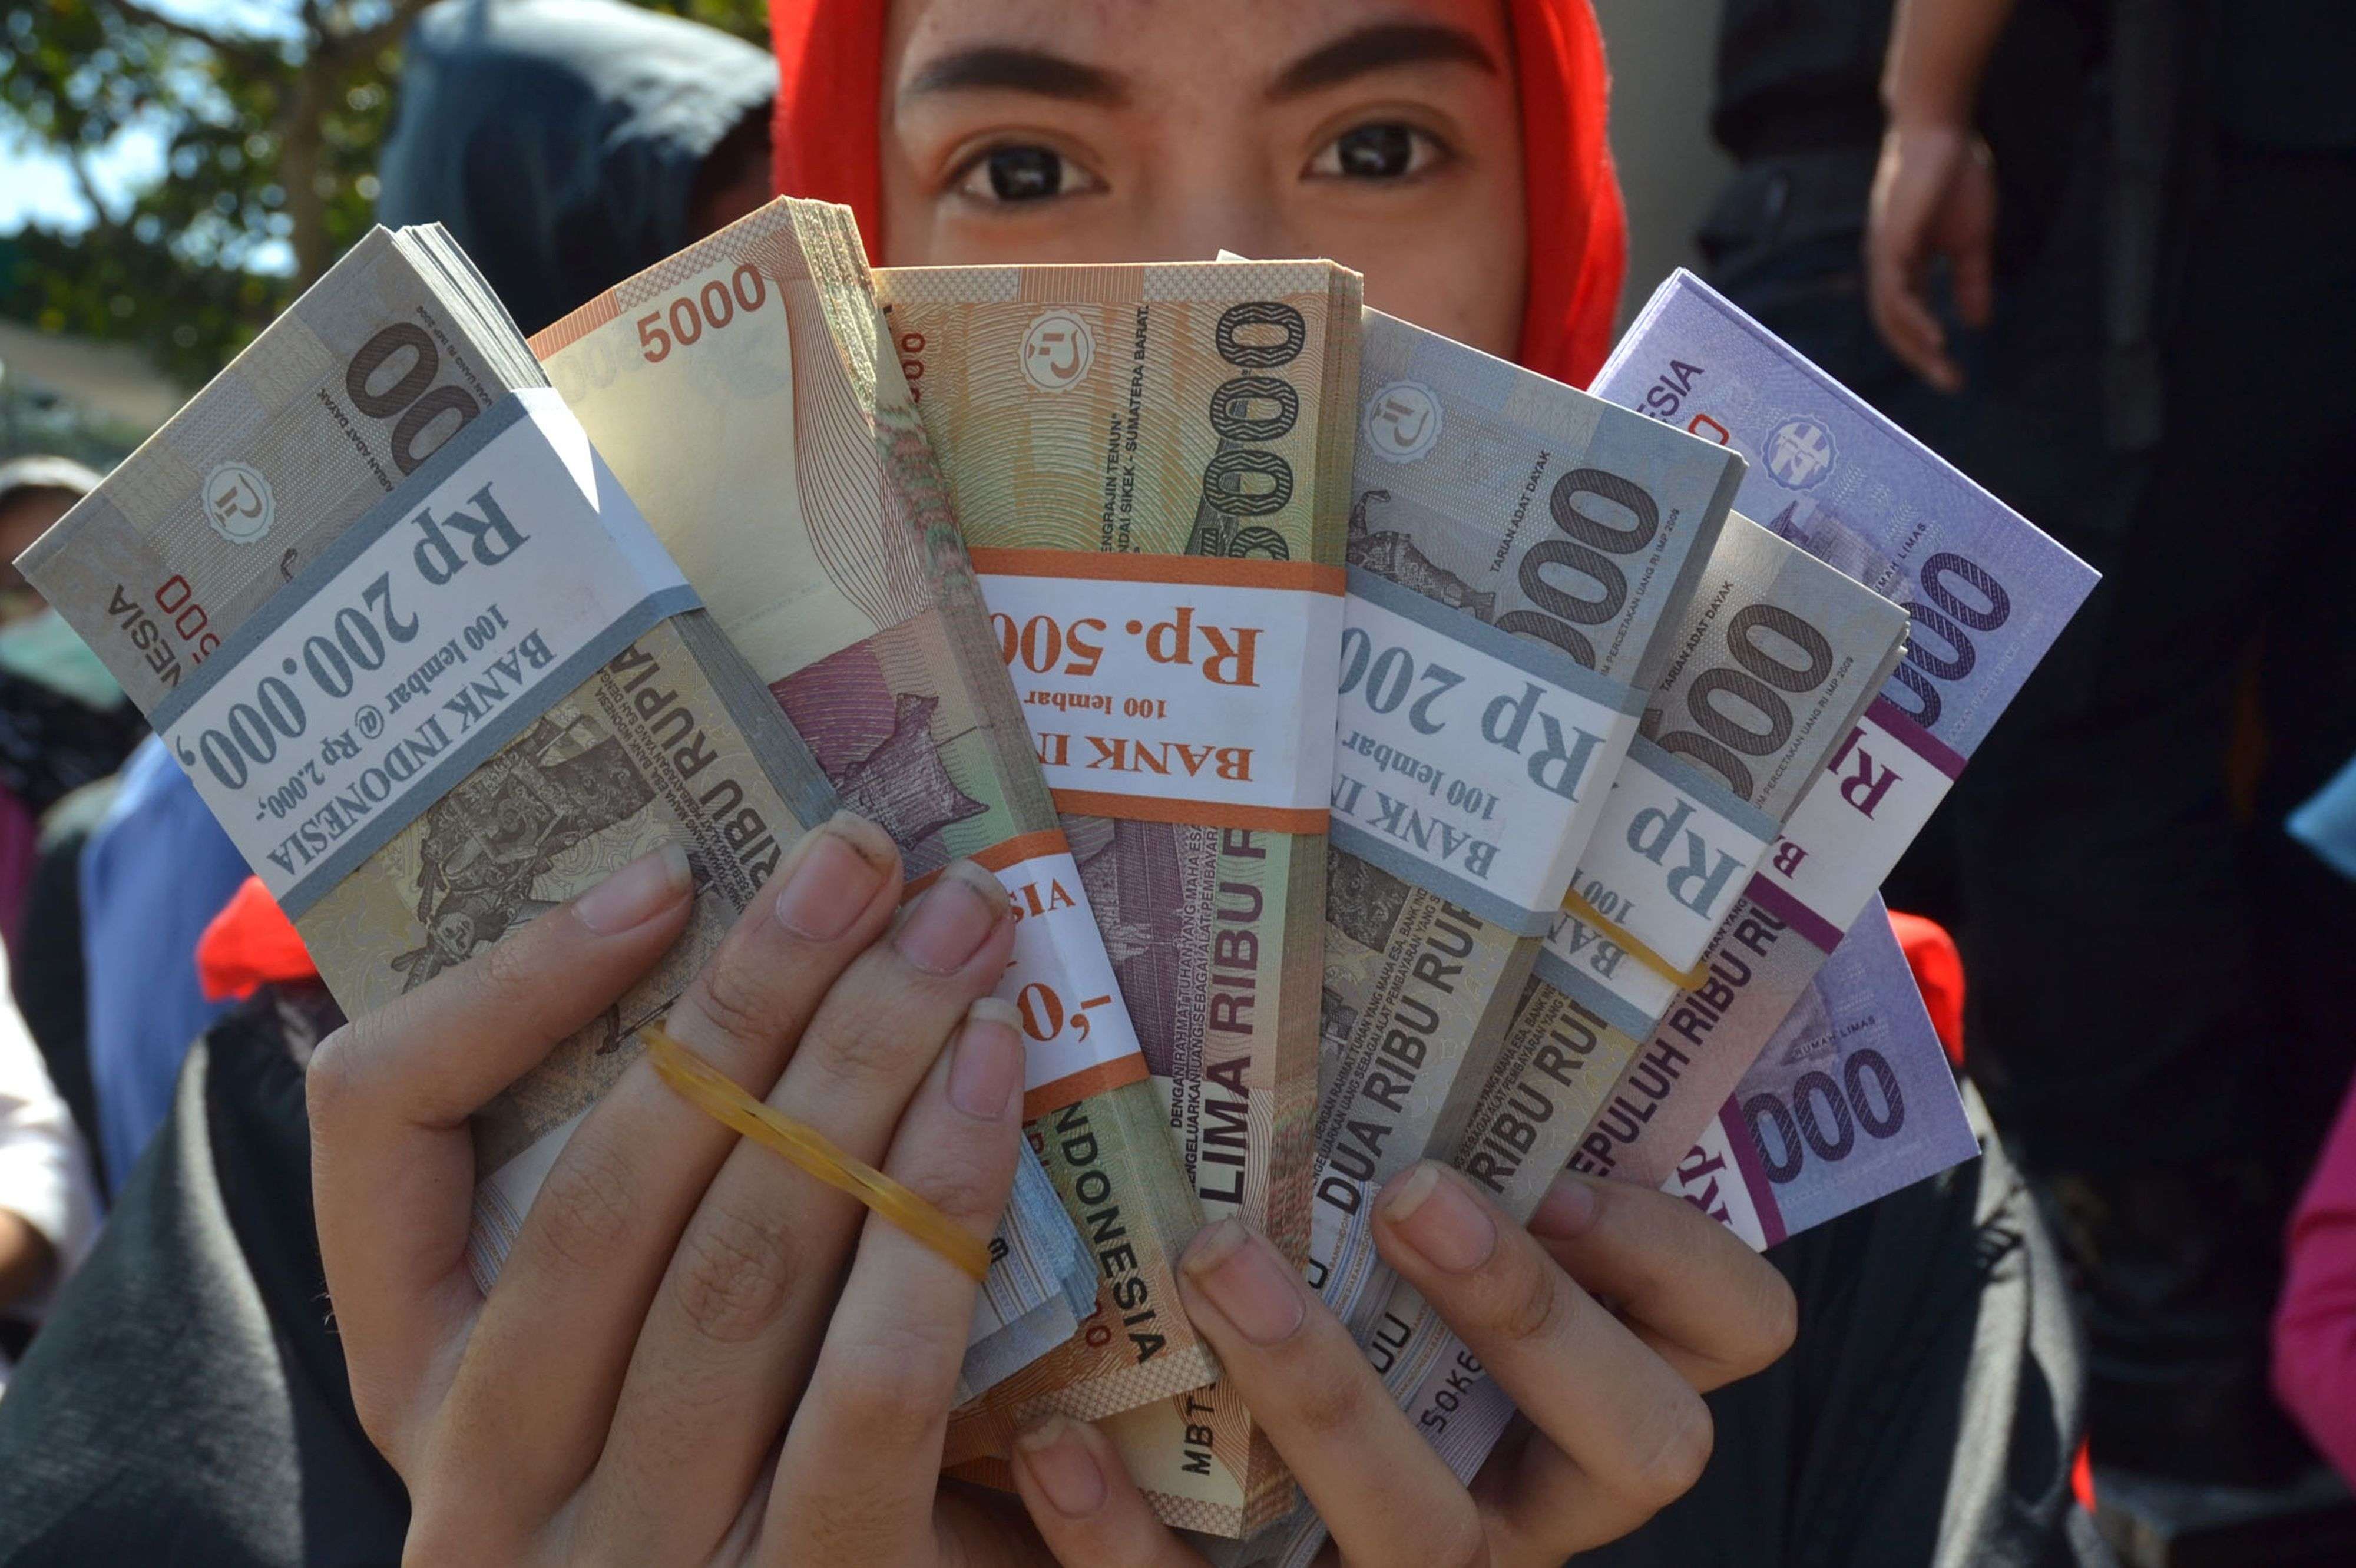 An Indonesian woman holds up rupiah notes she plans to distribute to family members for Eid al-Fitr at the end of the holy month of Ramadan next month. Photo: AFP